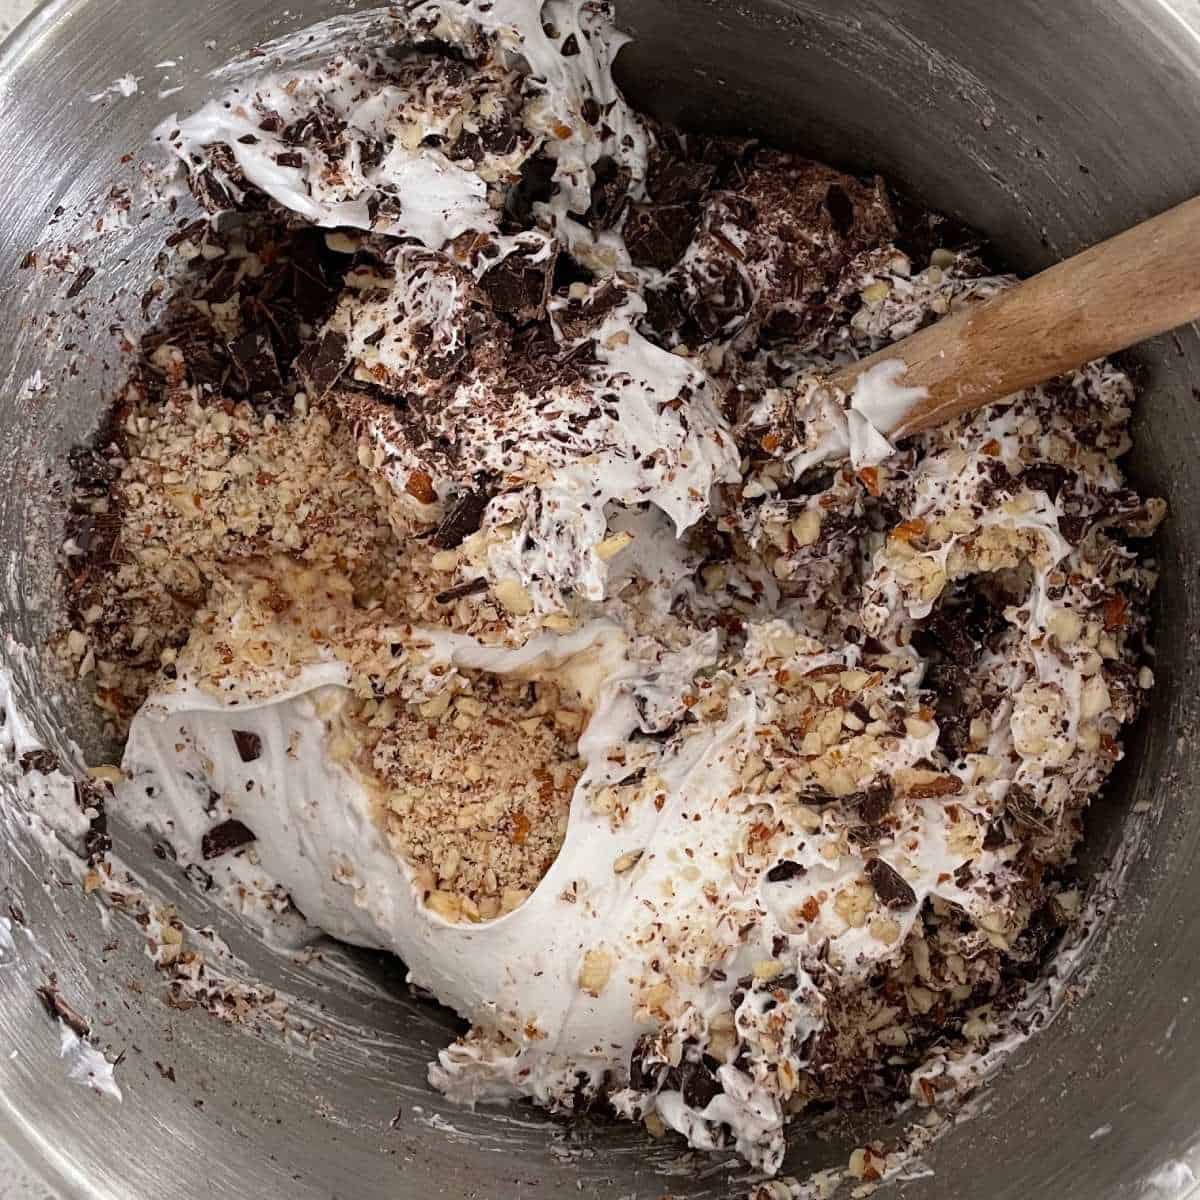 The combined mixture for Chocolate Almond Meringue Cookies in a mixing bowl.